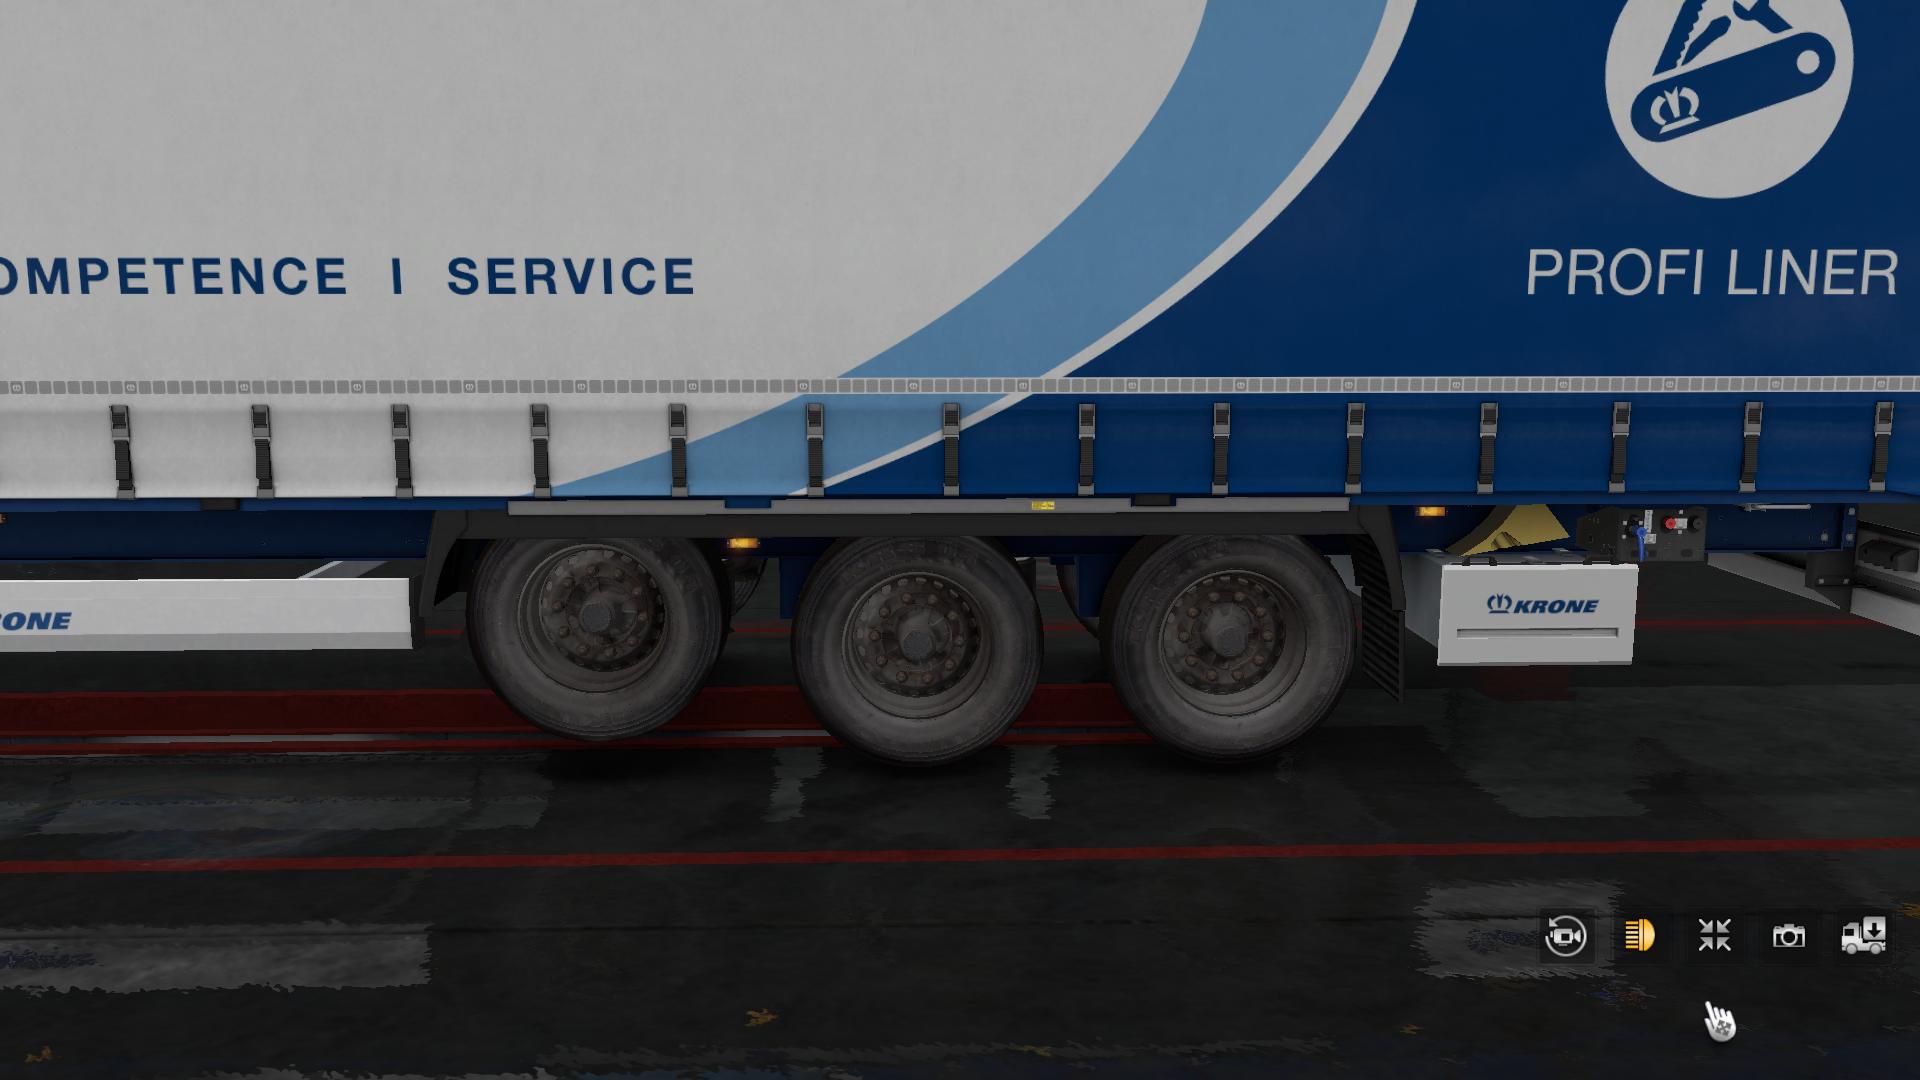 New wheels for your own trailers v1.0